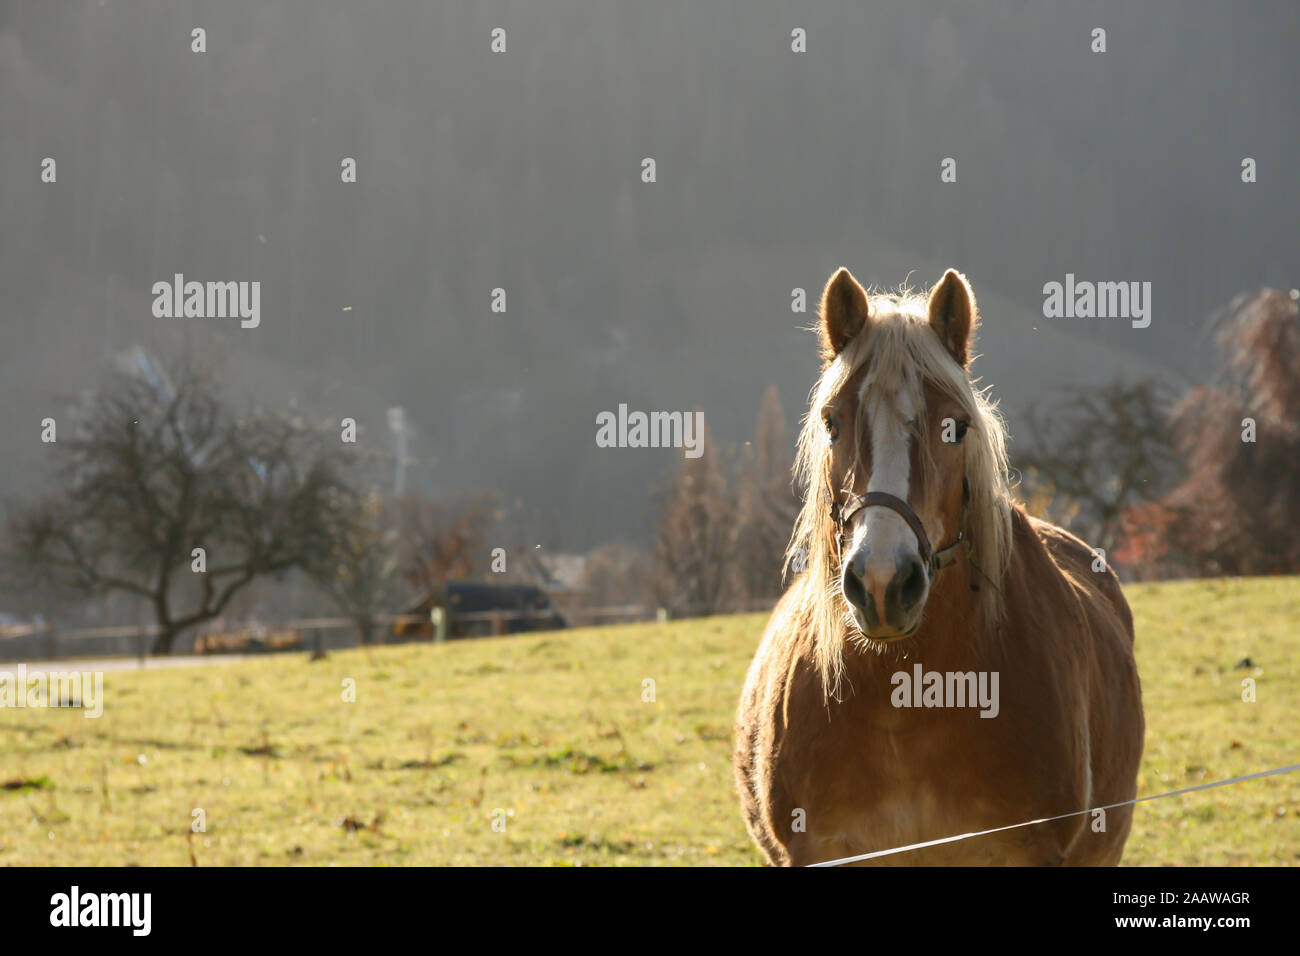 A horse is standing proudly on its pasture. The mane is illuminated by the sun giving a nice glow like effect. Stock Photo